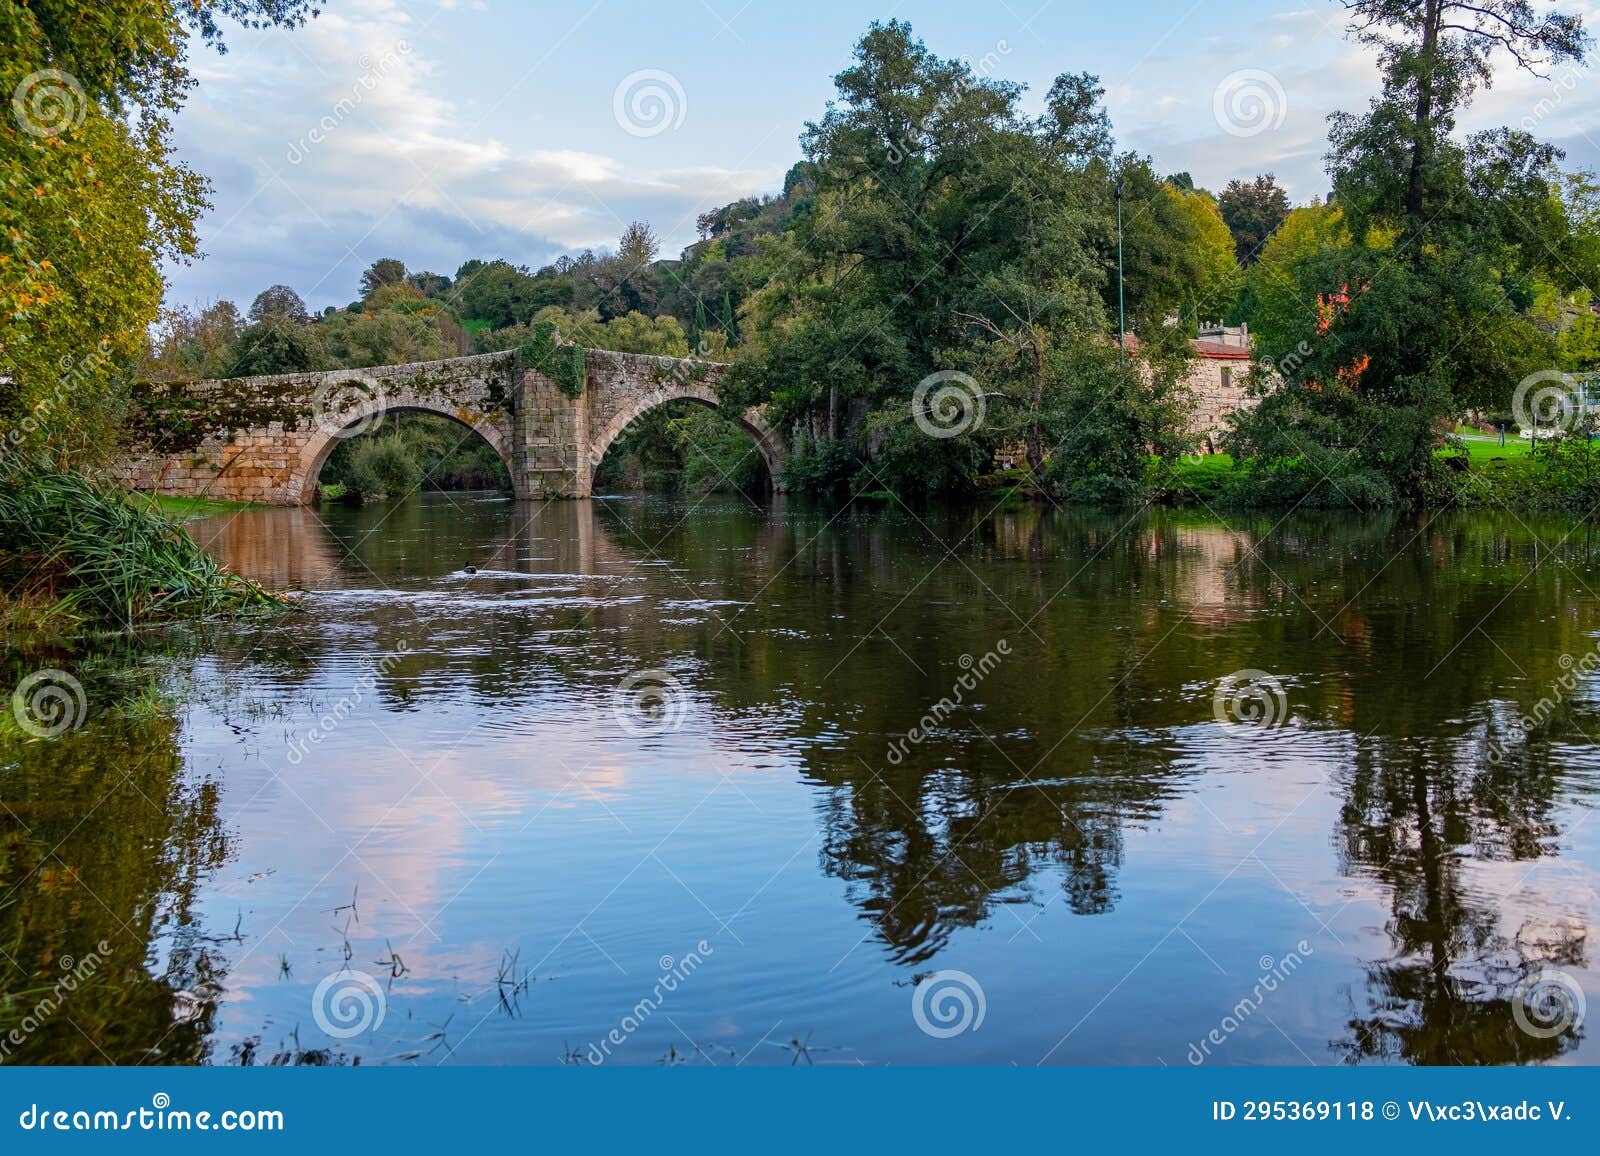 medieval stone bridge over the arnoia river in the town of allariz. province of ourense. galicia, spain